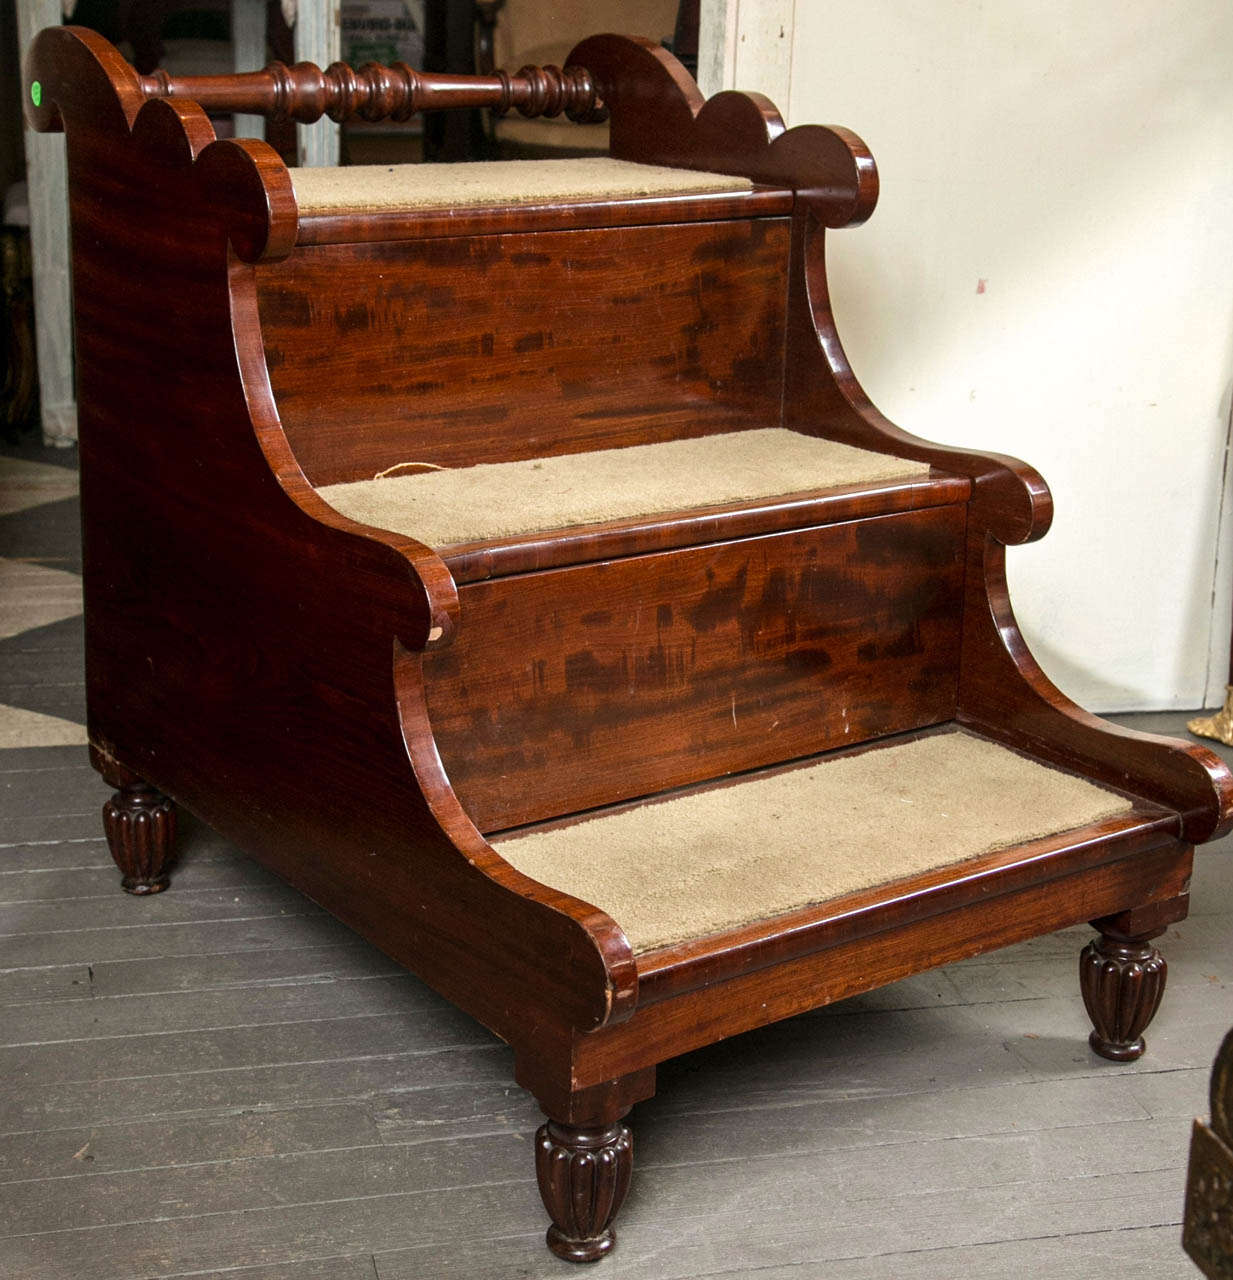 Unusual  large scale steps with  turned grab  bar at top, scalloped  side tops, sweeping down to  middle step, then sweeping to lower step.  The top step  lifts up , the middle step slides forward and lifts open to a chamber pot compartment and the